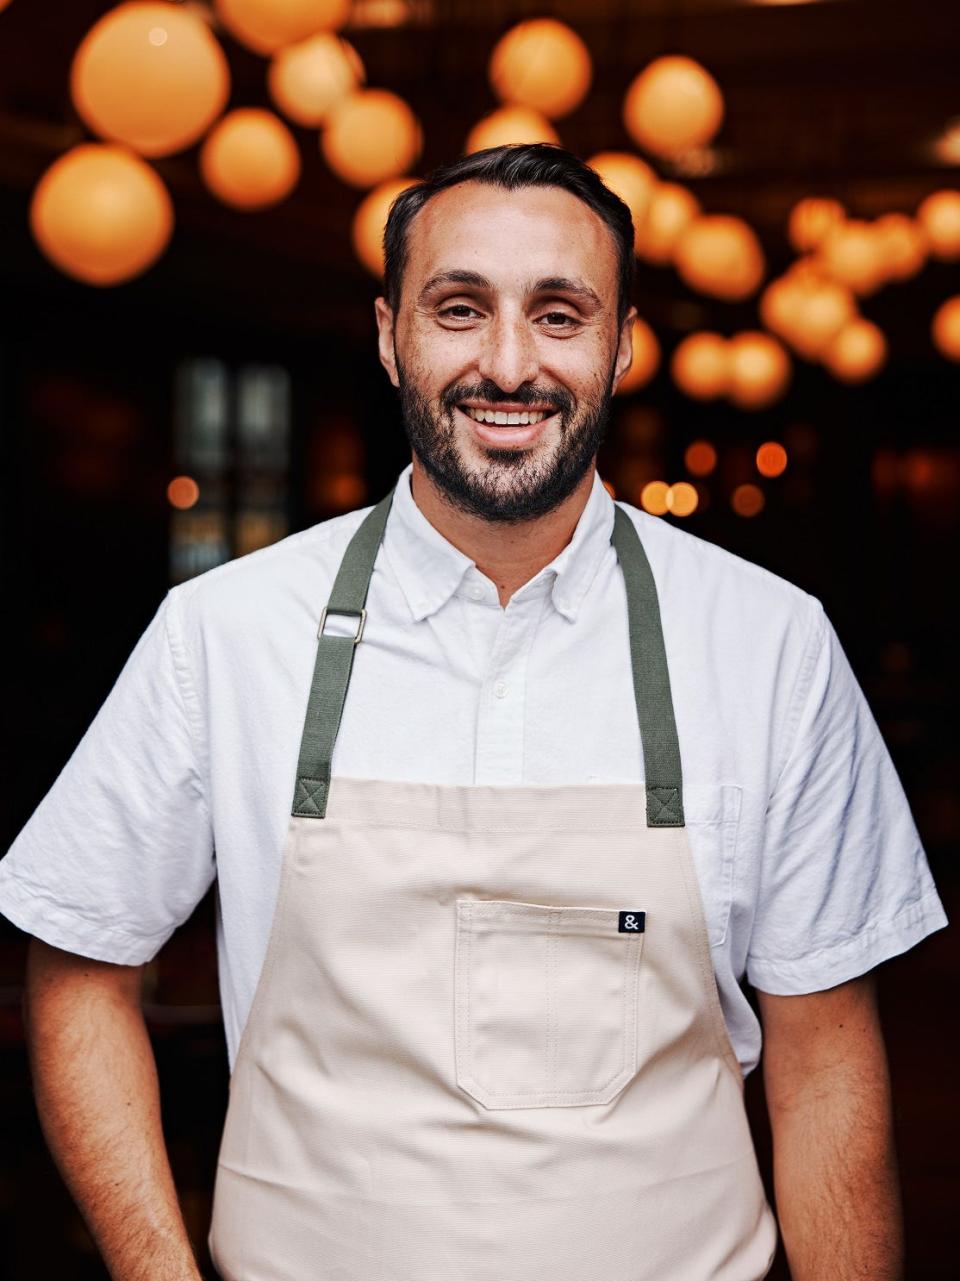 John Castellucci is culinary director of The Iberian Pig.